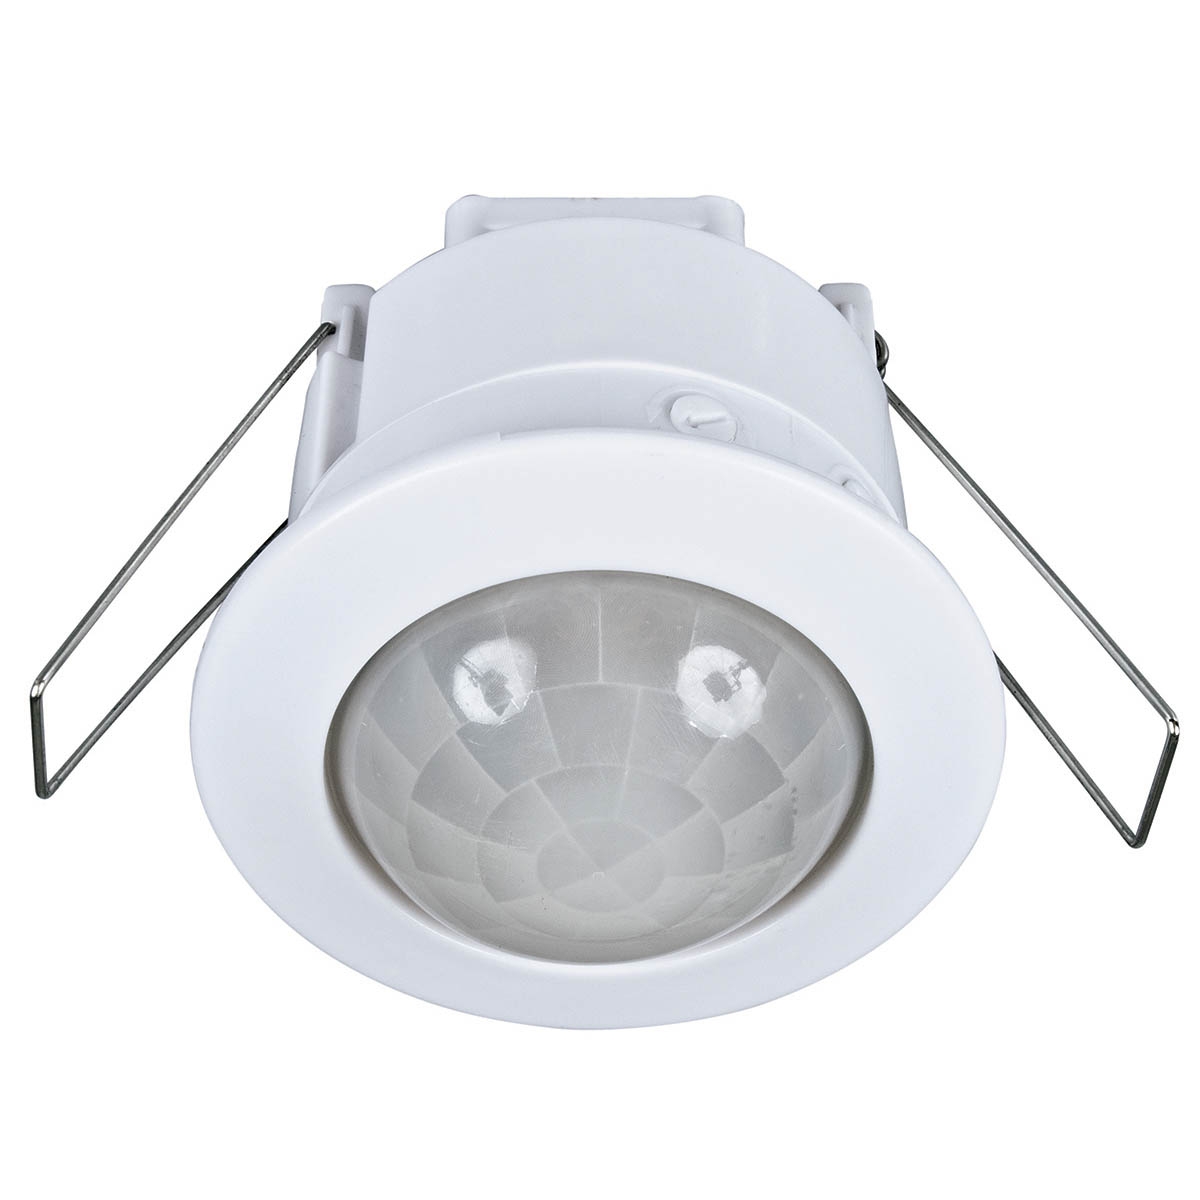 Ceiling Mounted Pir Security Light